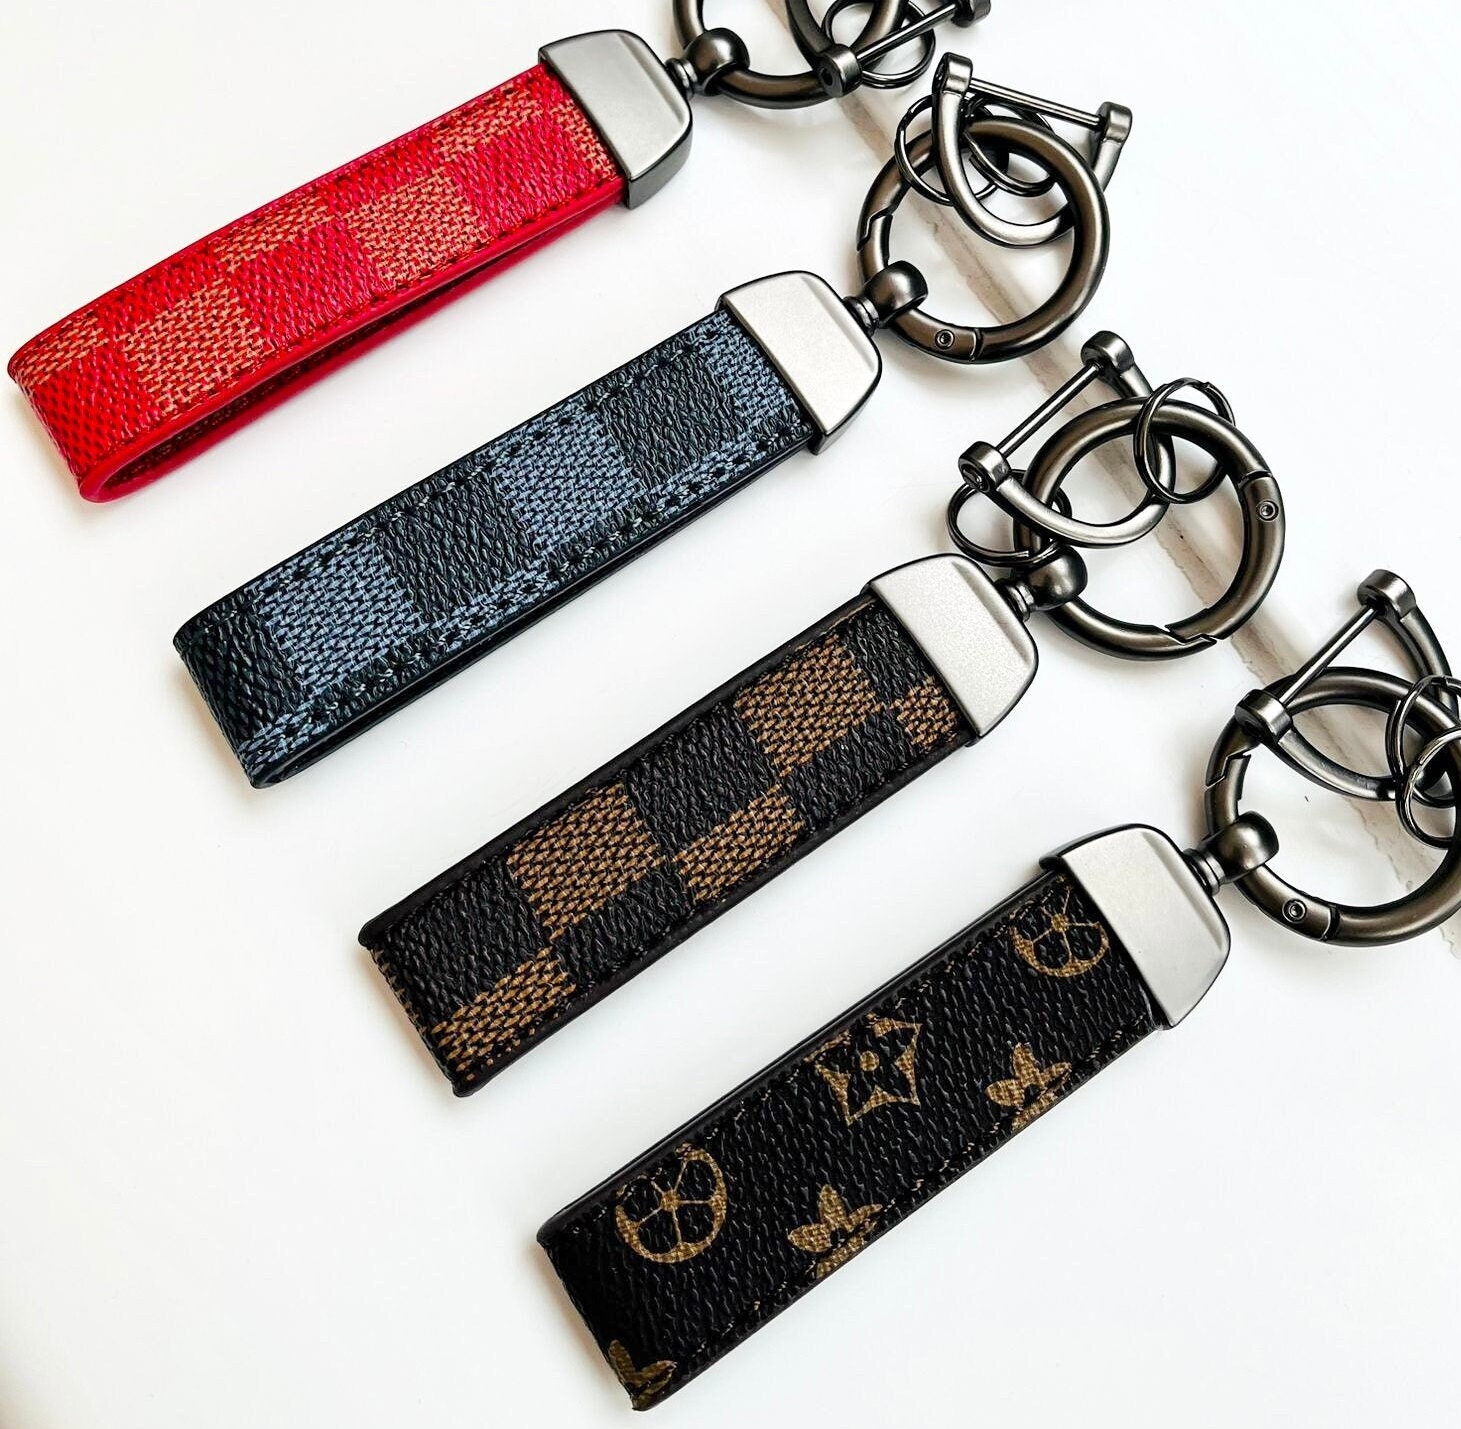 🔥NEW LOUIS VUITTON Cles LV Facettes Bag Charm Key Holder Ring